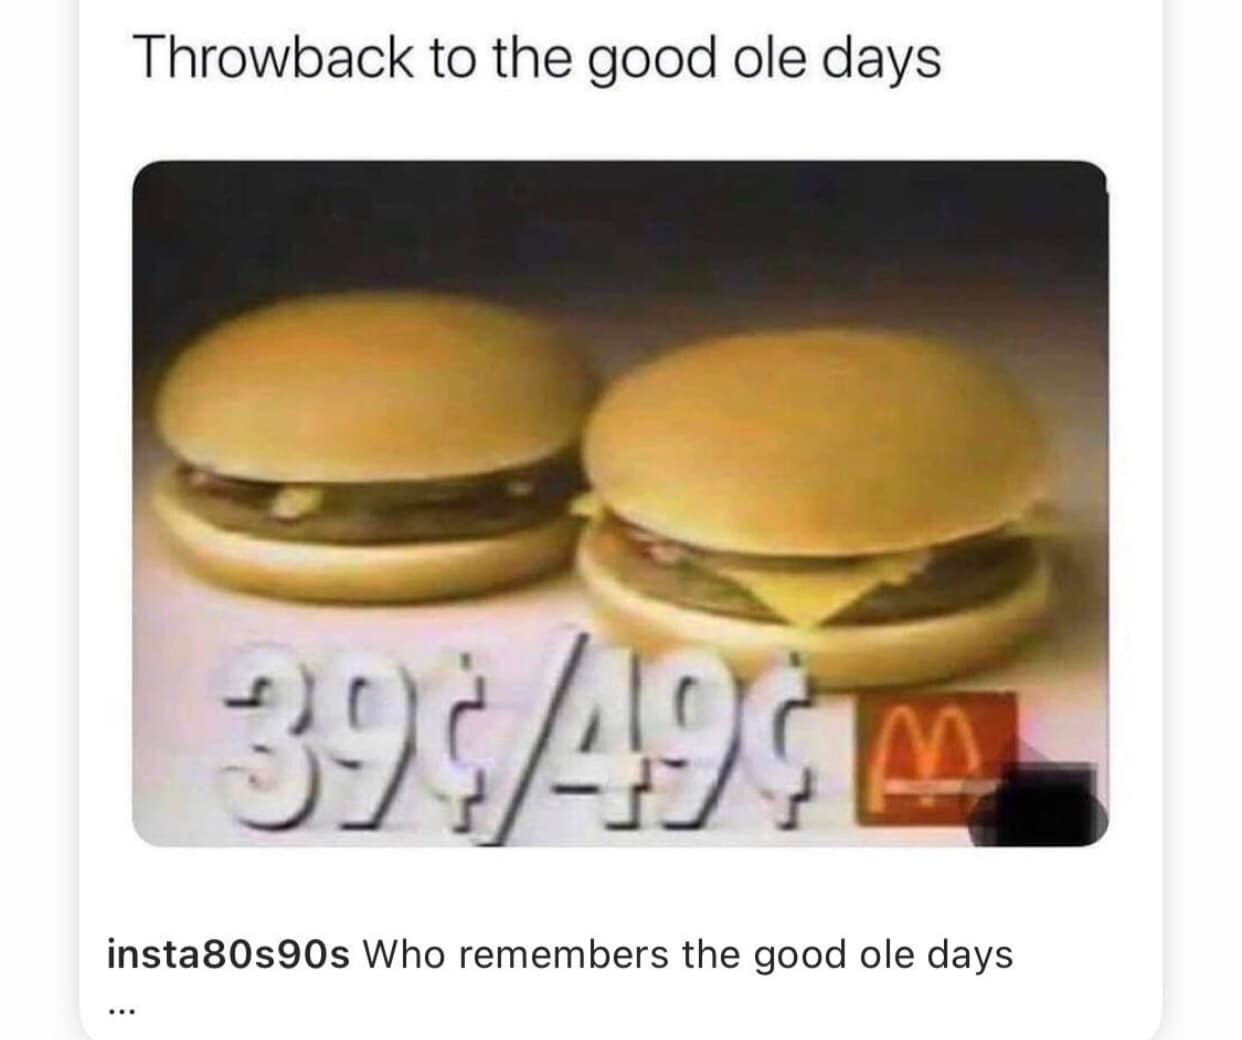 Things to relate to over 30 - cheeseburger - Throwback to the good ole days